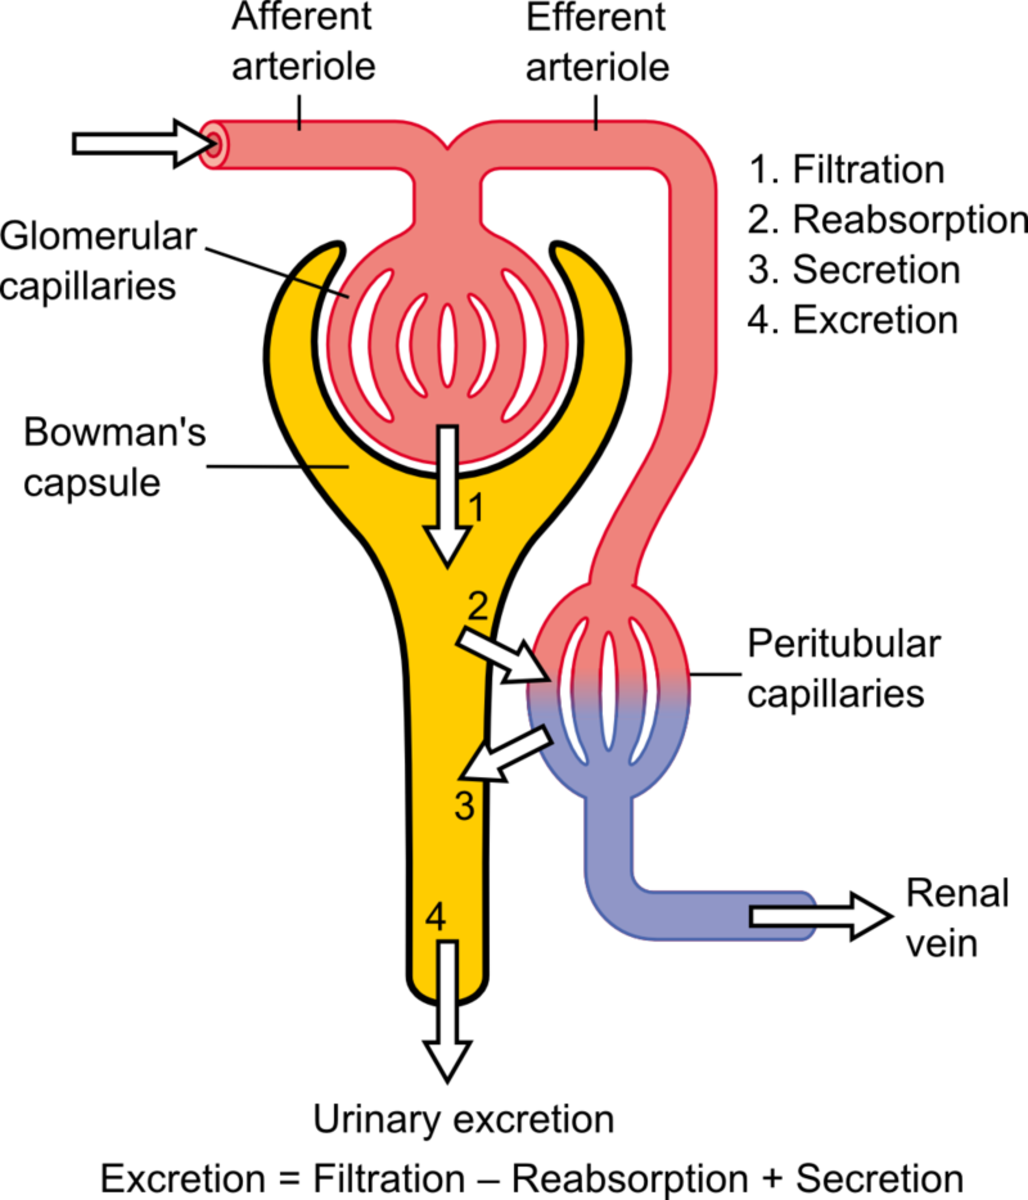 A kidney contains around a million tiny tubules called nephrons. These are vital structures in the production of urine.